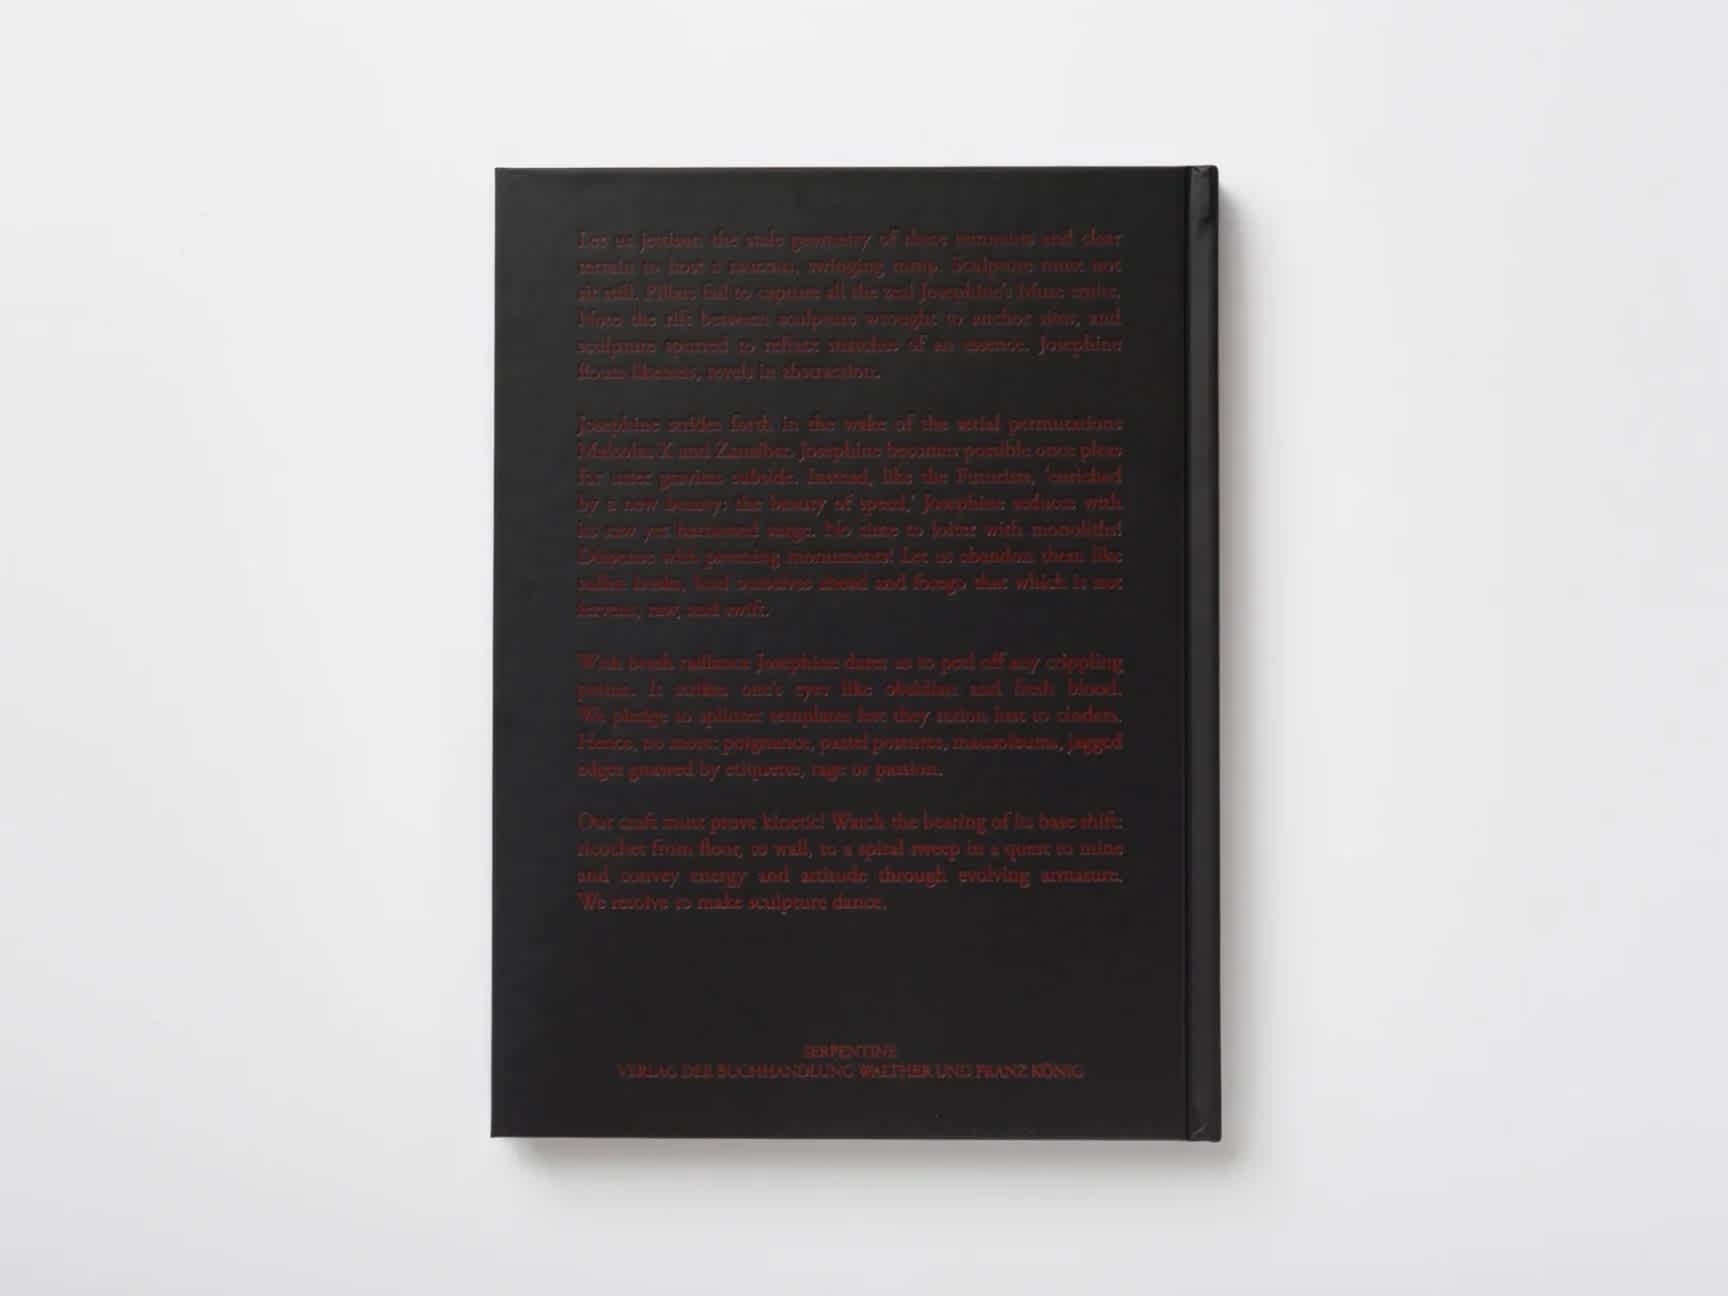 Back cover of a book with red embossed script on black board.